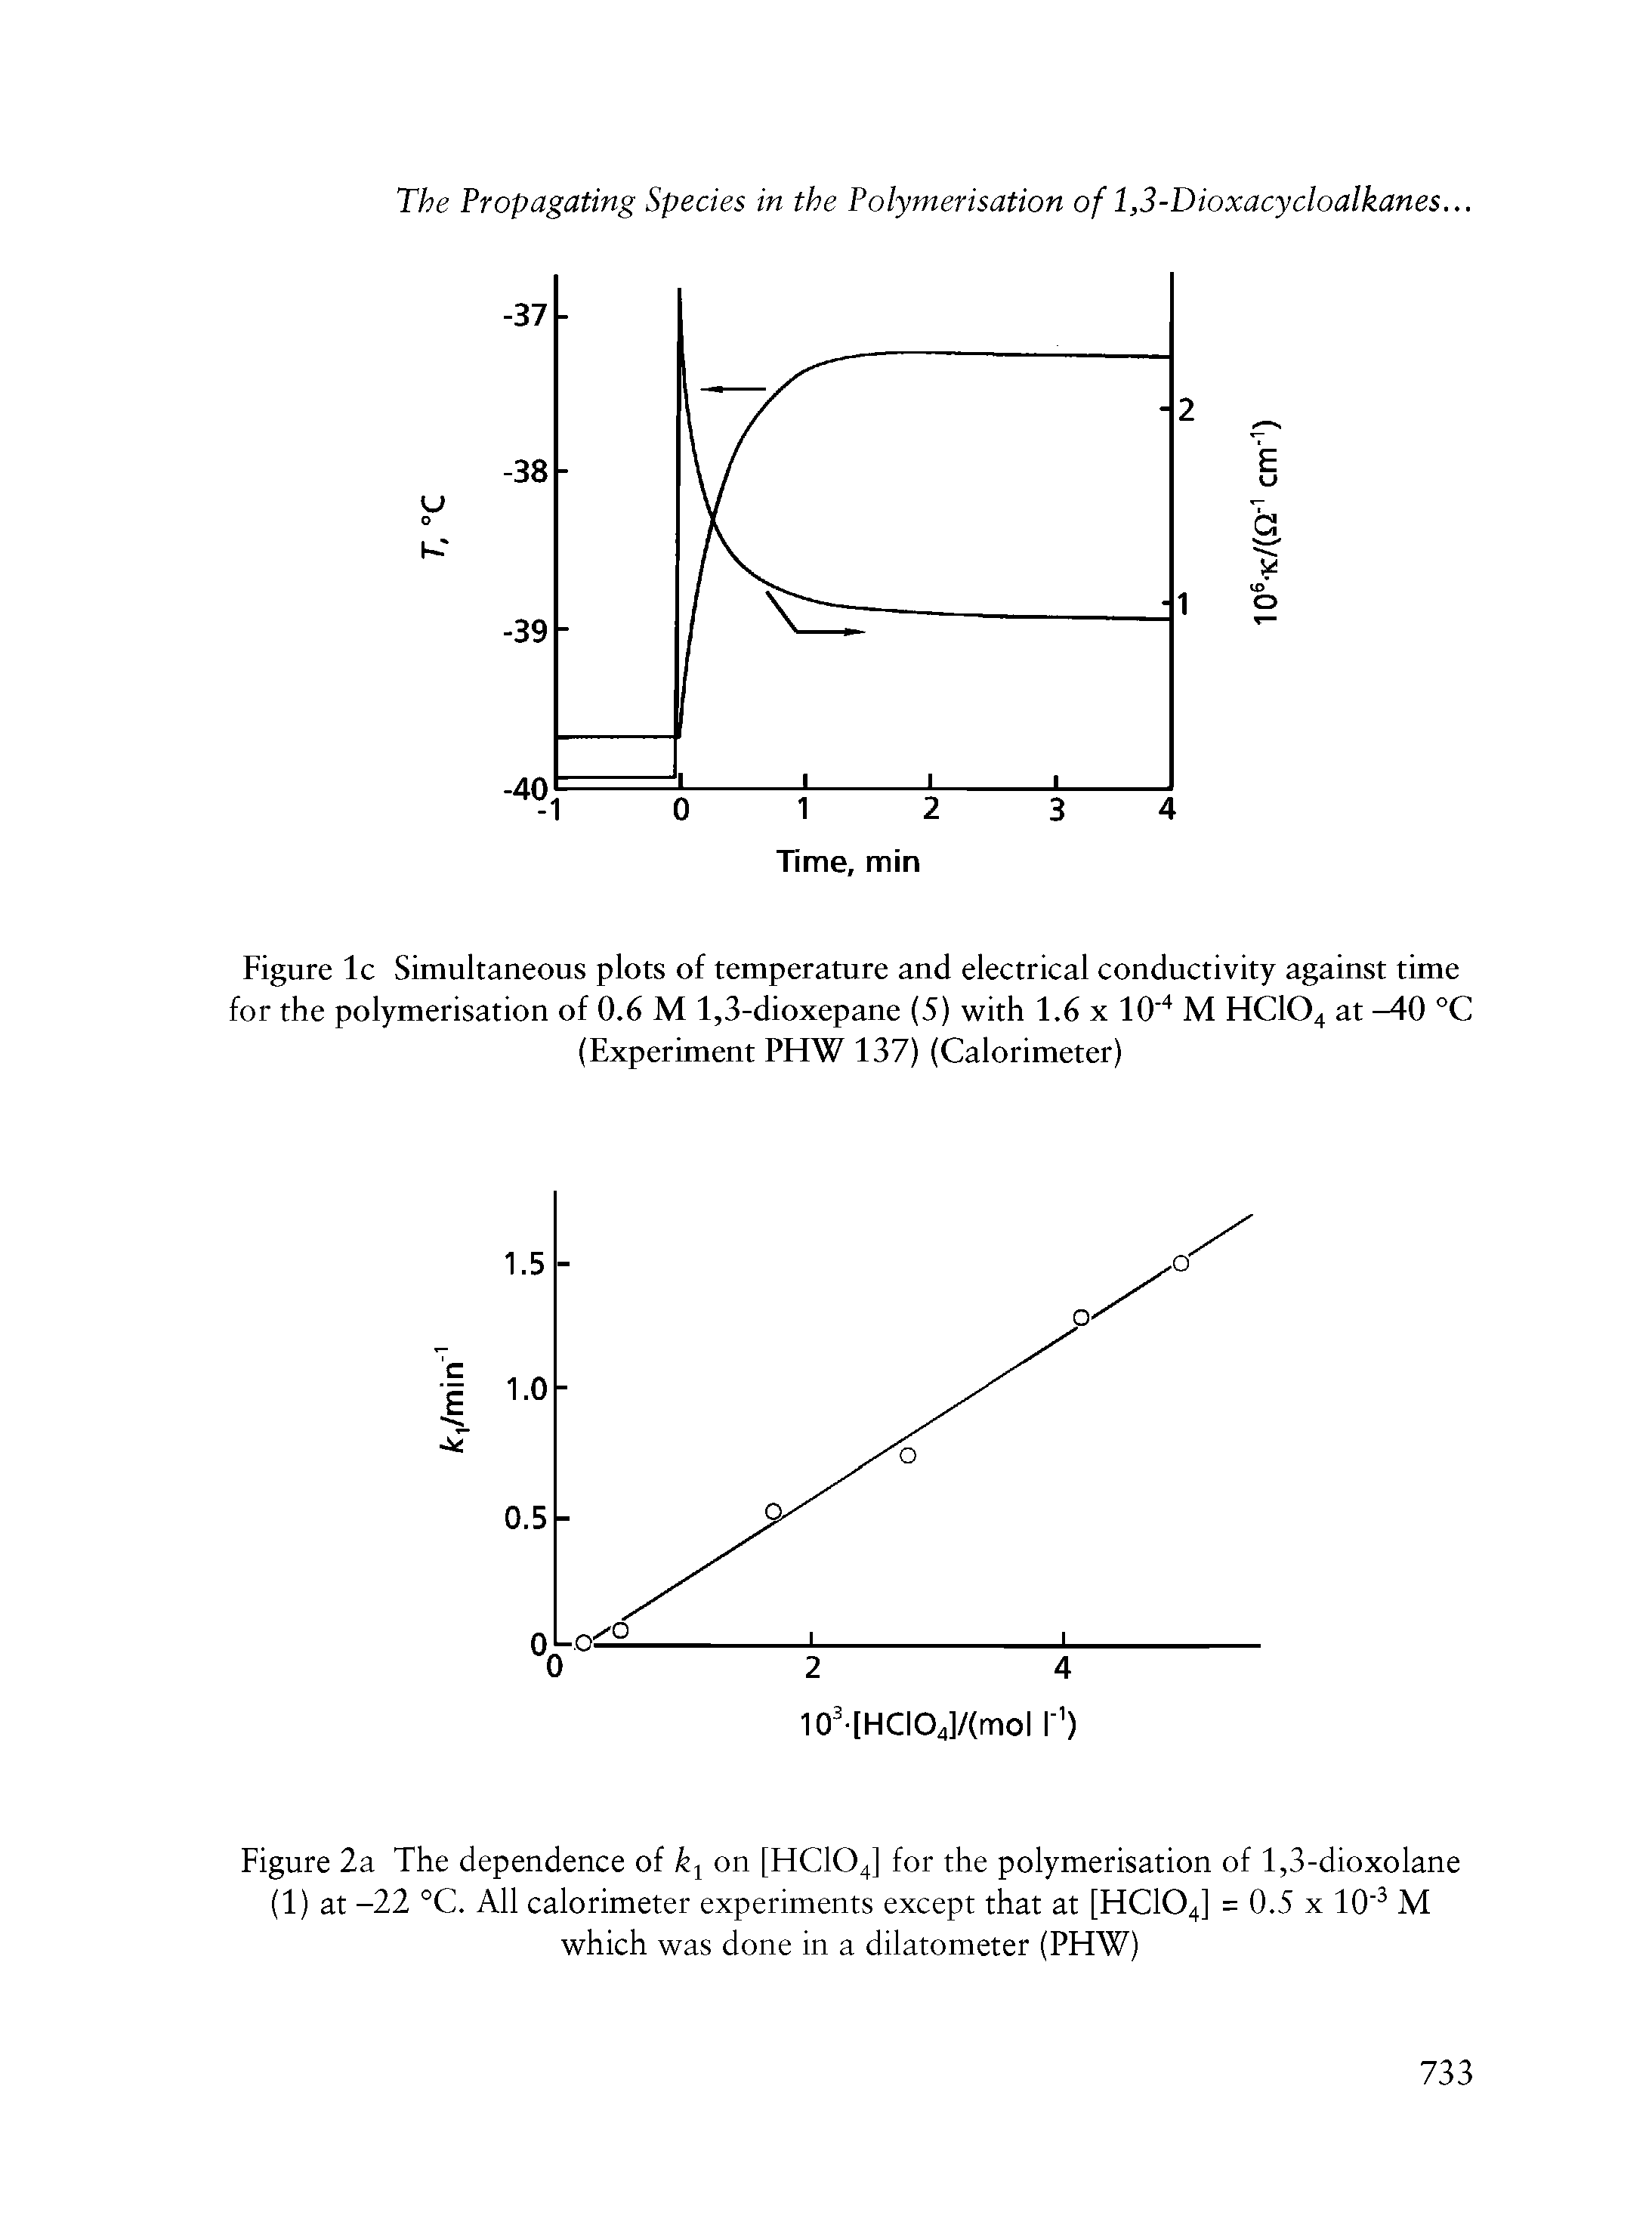 Figure 2a The dependence of k1 on [HC104] for the polymerisation of 1,3-dioxolane (1) at -22 °C. All calorimeter experiments except that at [HC104] = 0.5 x 10 3 M which was done in a dilatometer (PHW)...